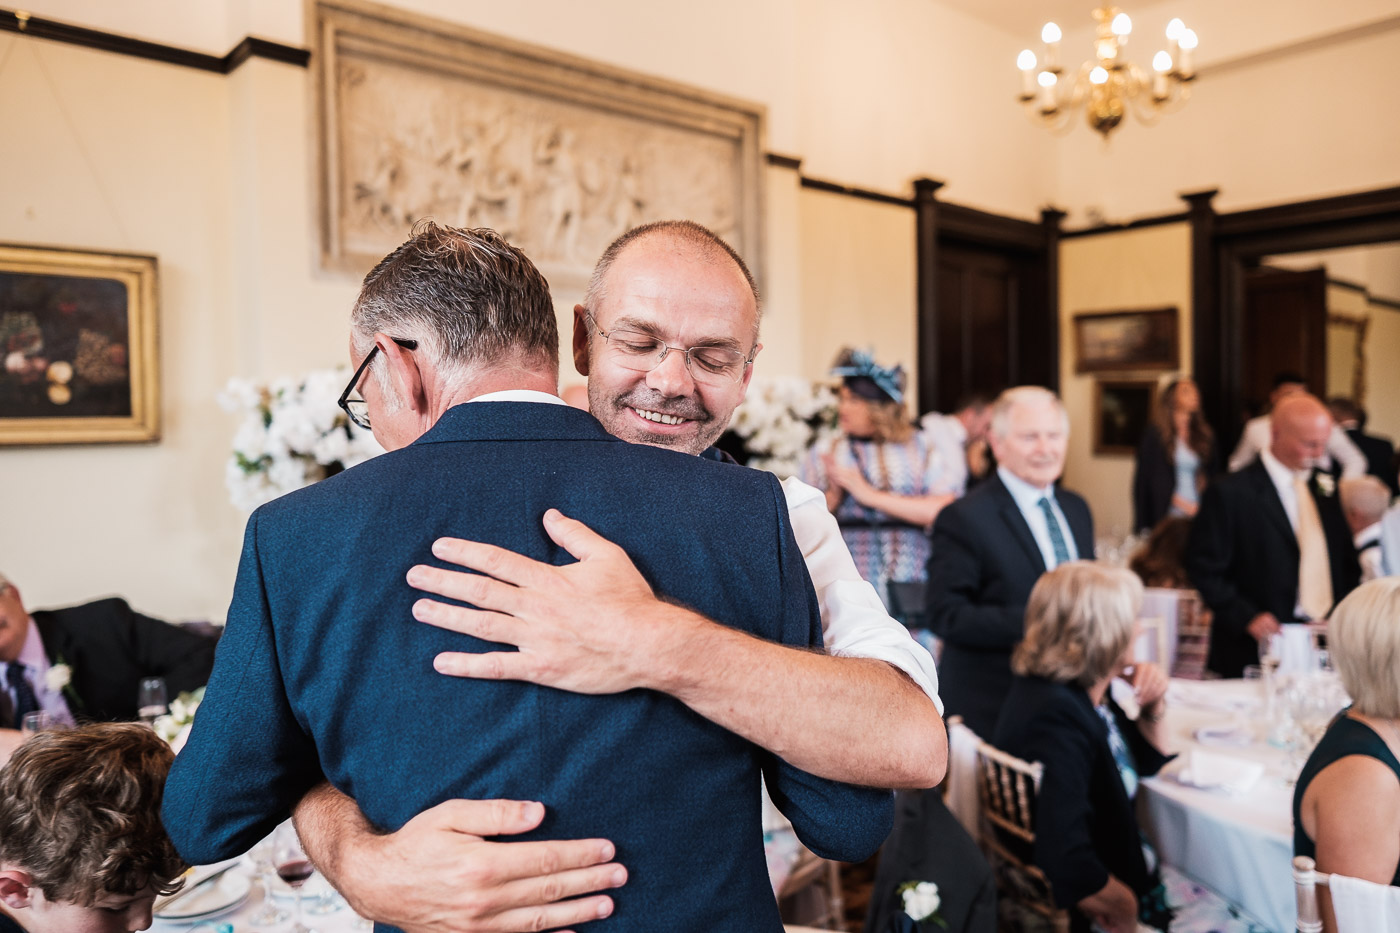 Groom embraces best man after speeches at Walton hall in warrington